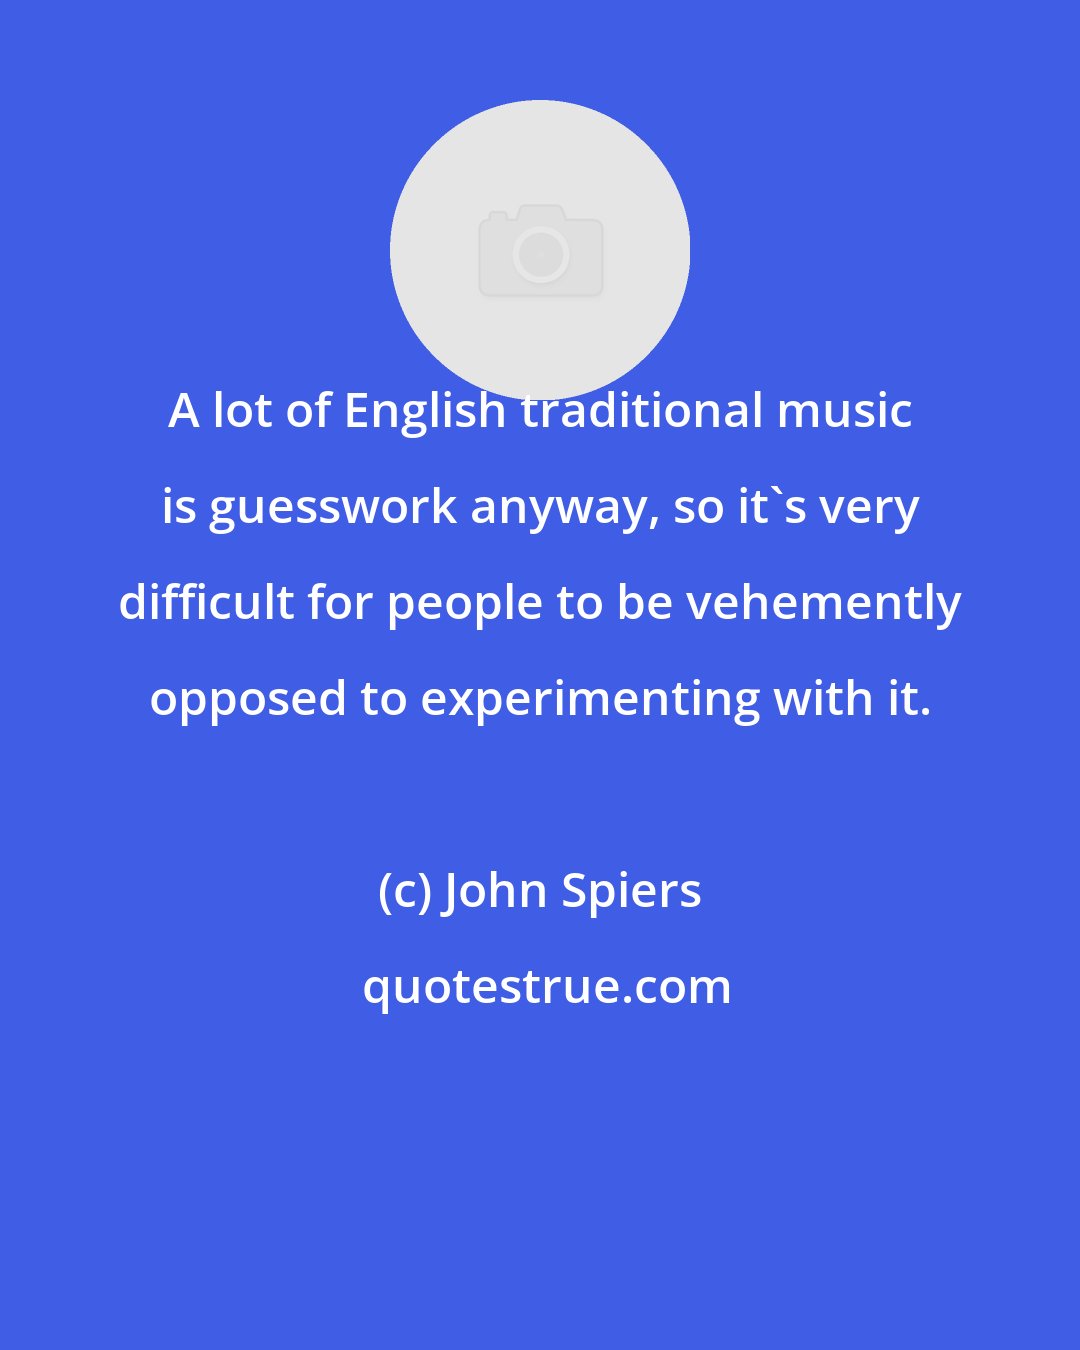 John Spiers: A lot of English traditional music is guesswork anyway, so it's very difficult for people to be vehemently opposed to experimenting with it.